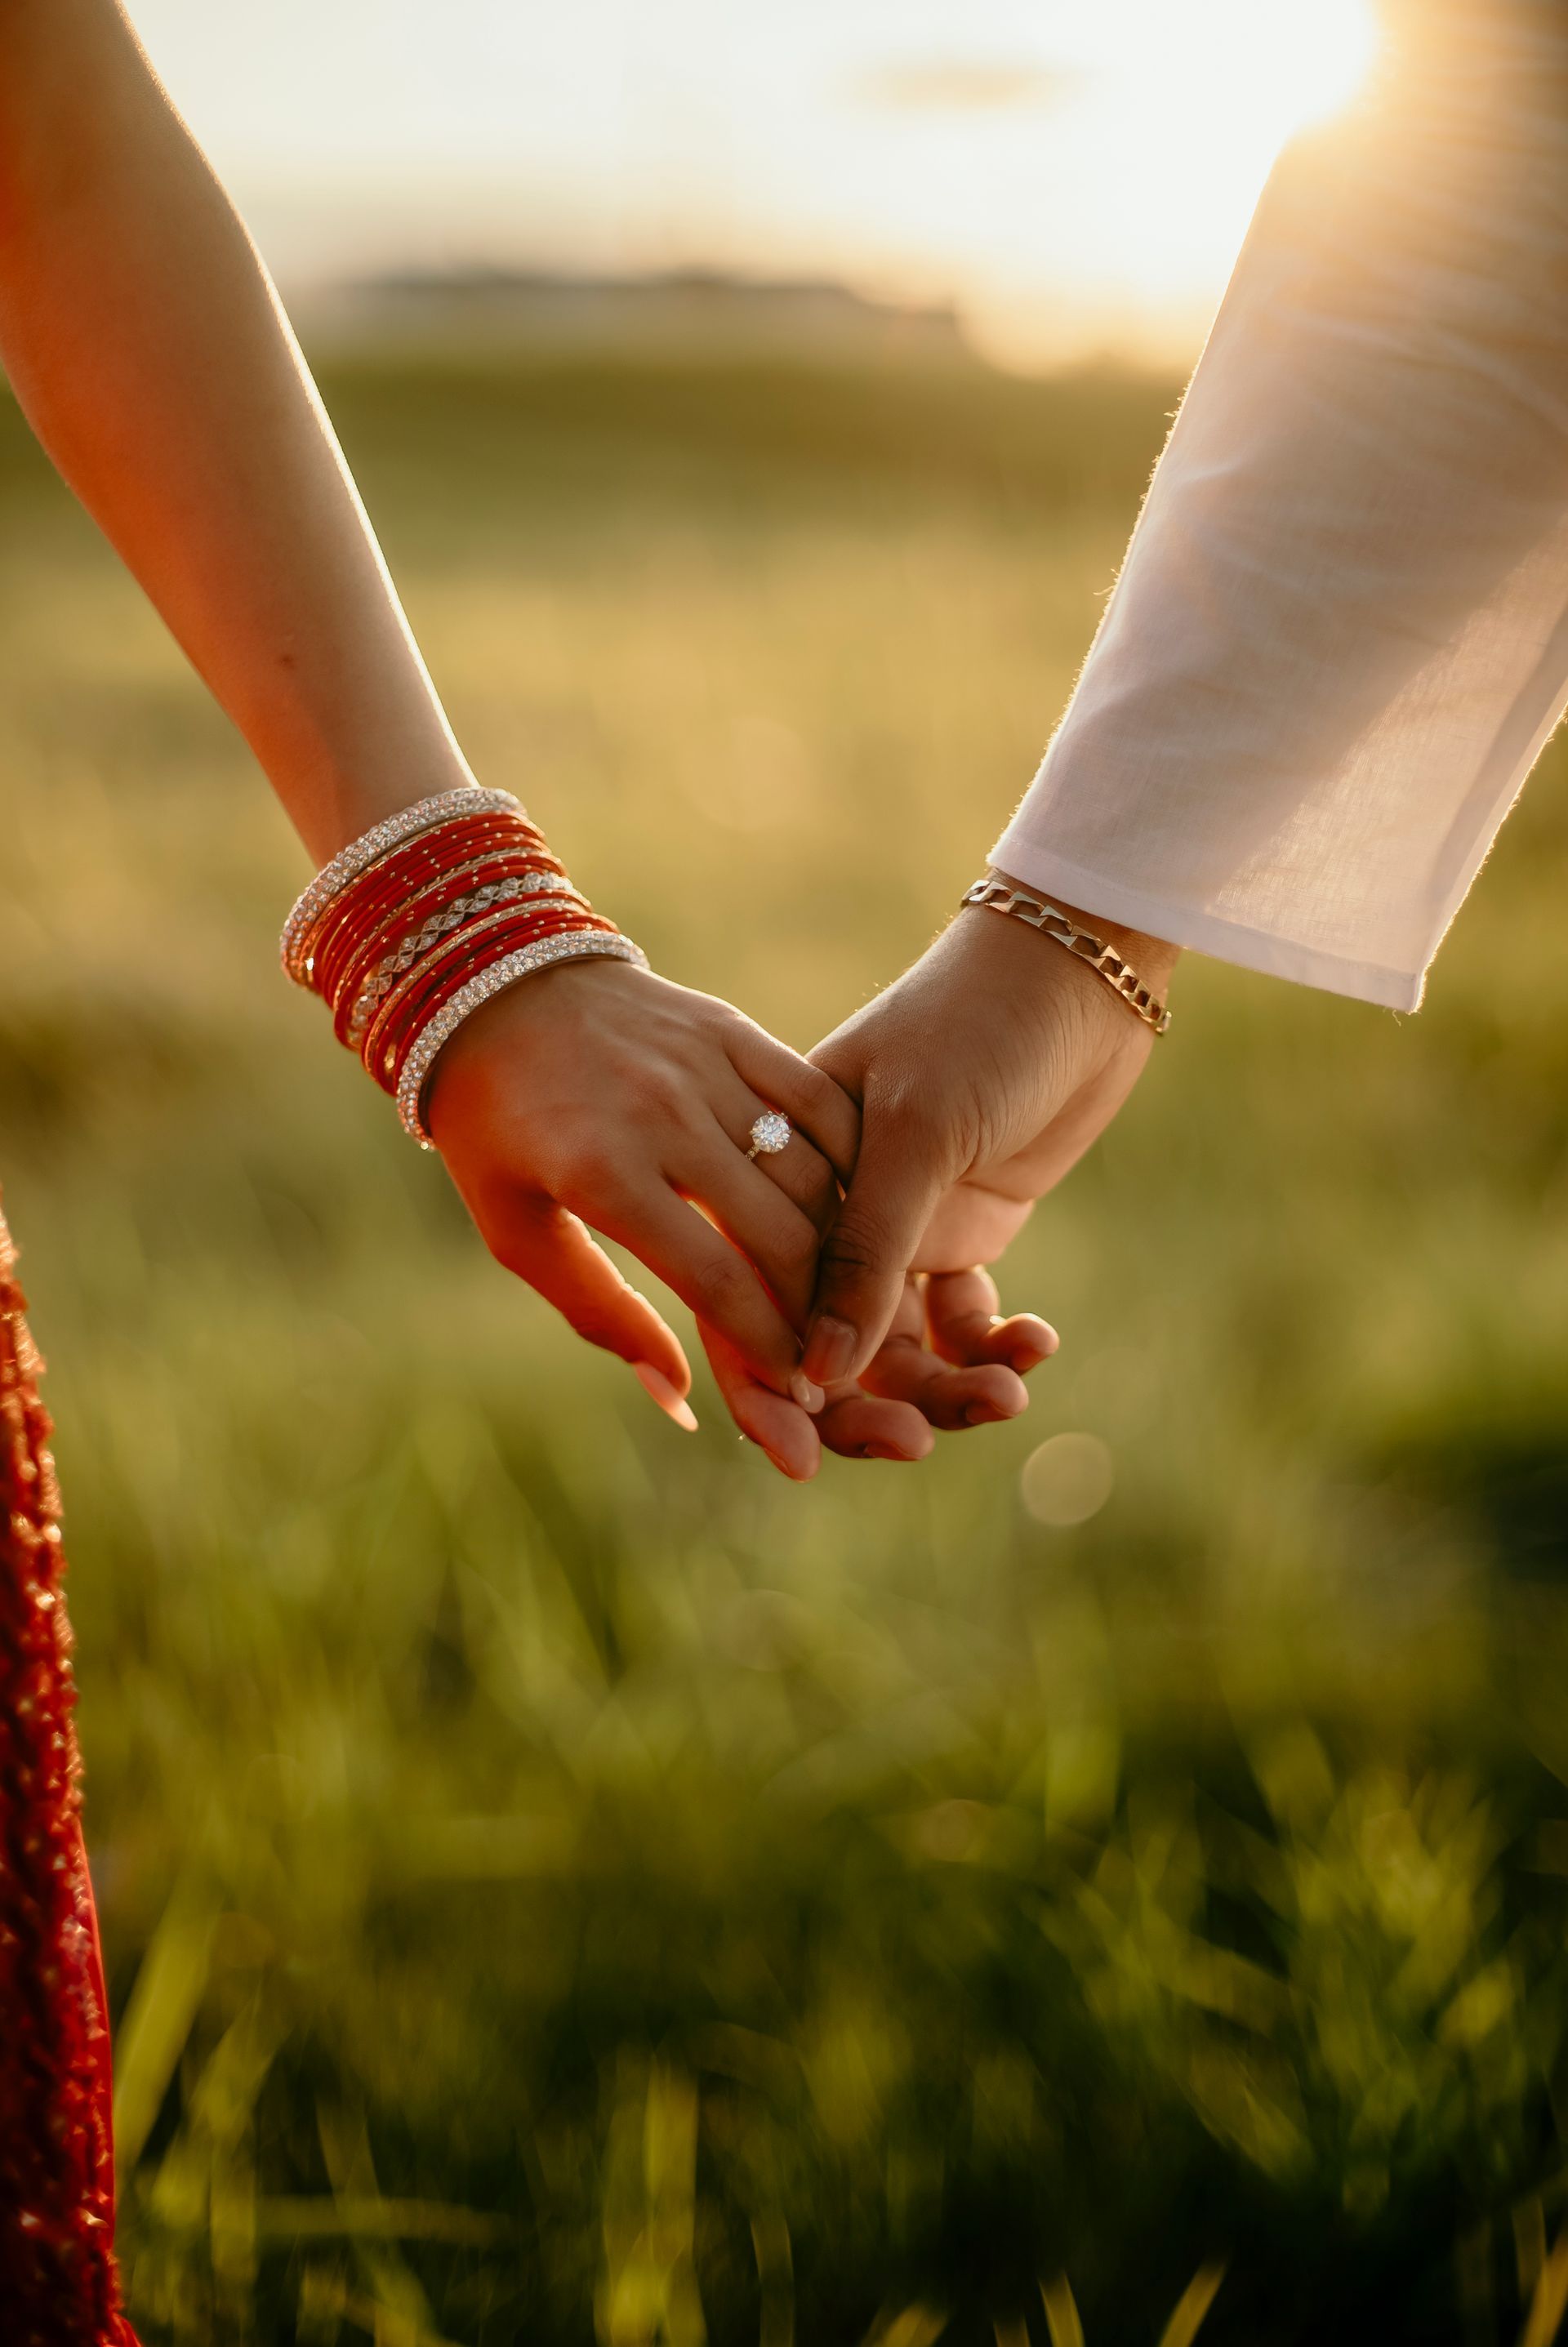 A man and a woman are holding hands in a field.